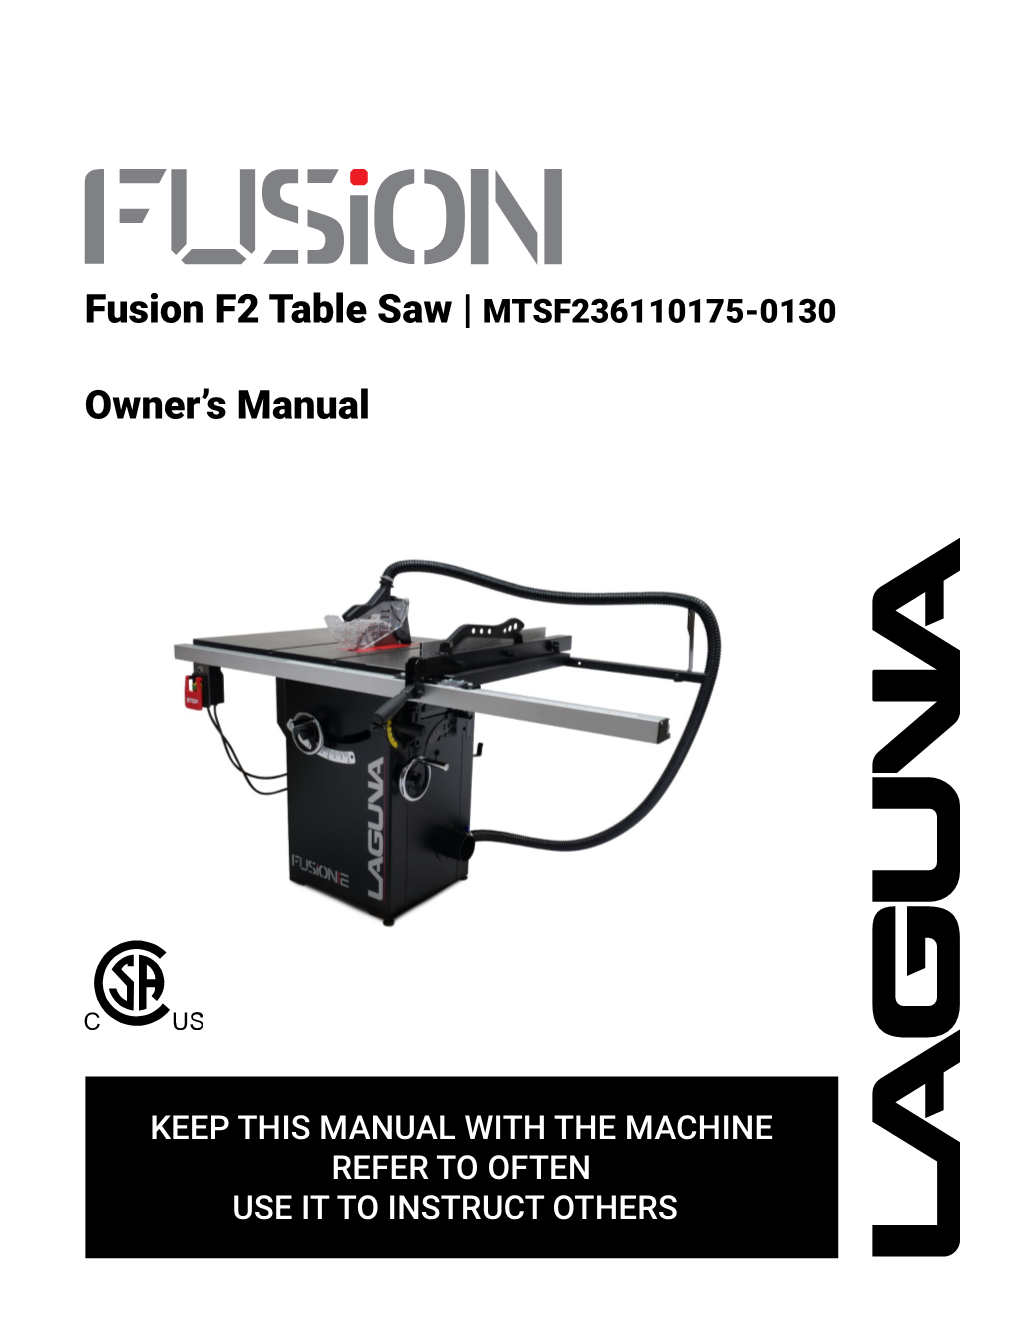 Fusion F2 Table Saw | MTSF236110175-0130